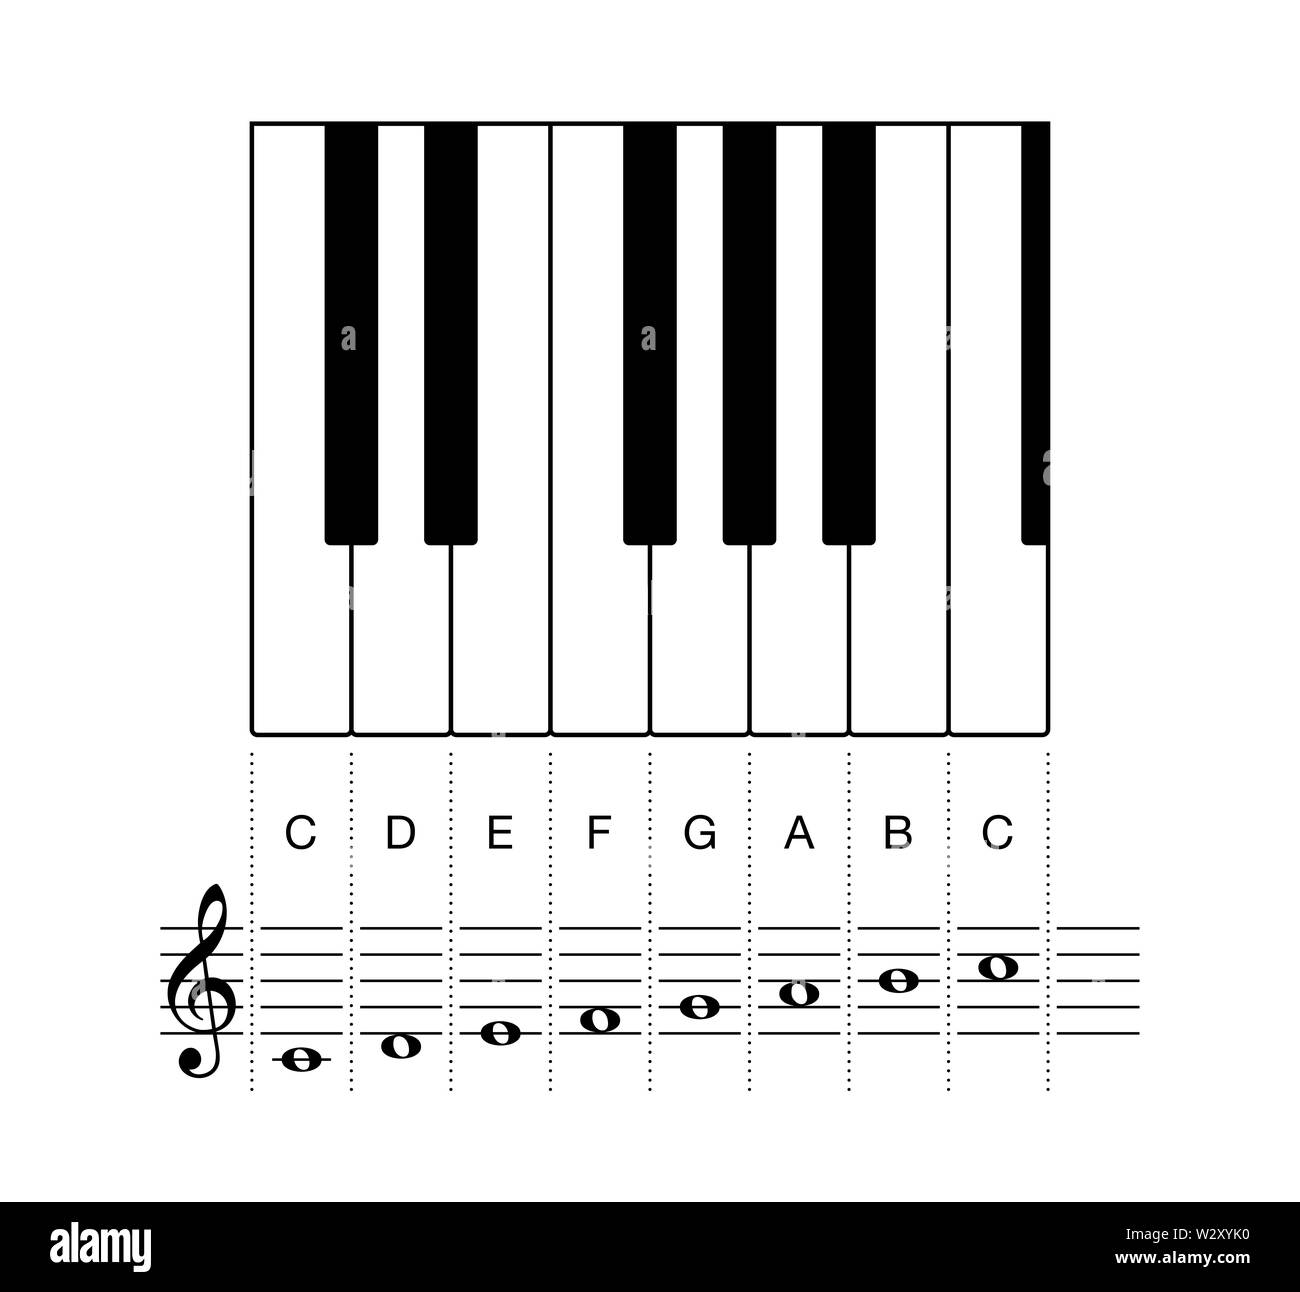 C major scale, one octave on staff and keyboard keys. Octave shown on keyboard keys and on a five-line staff with treble clef and whole notes. Stock Photo